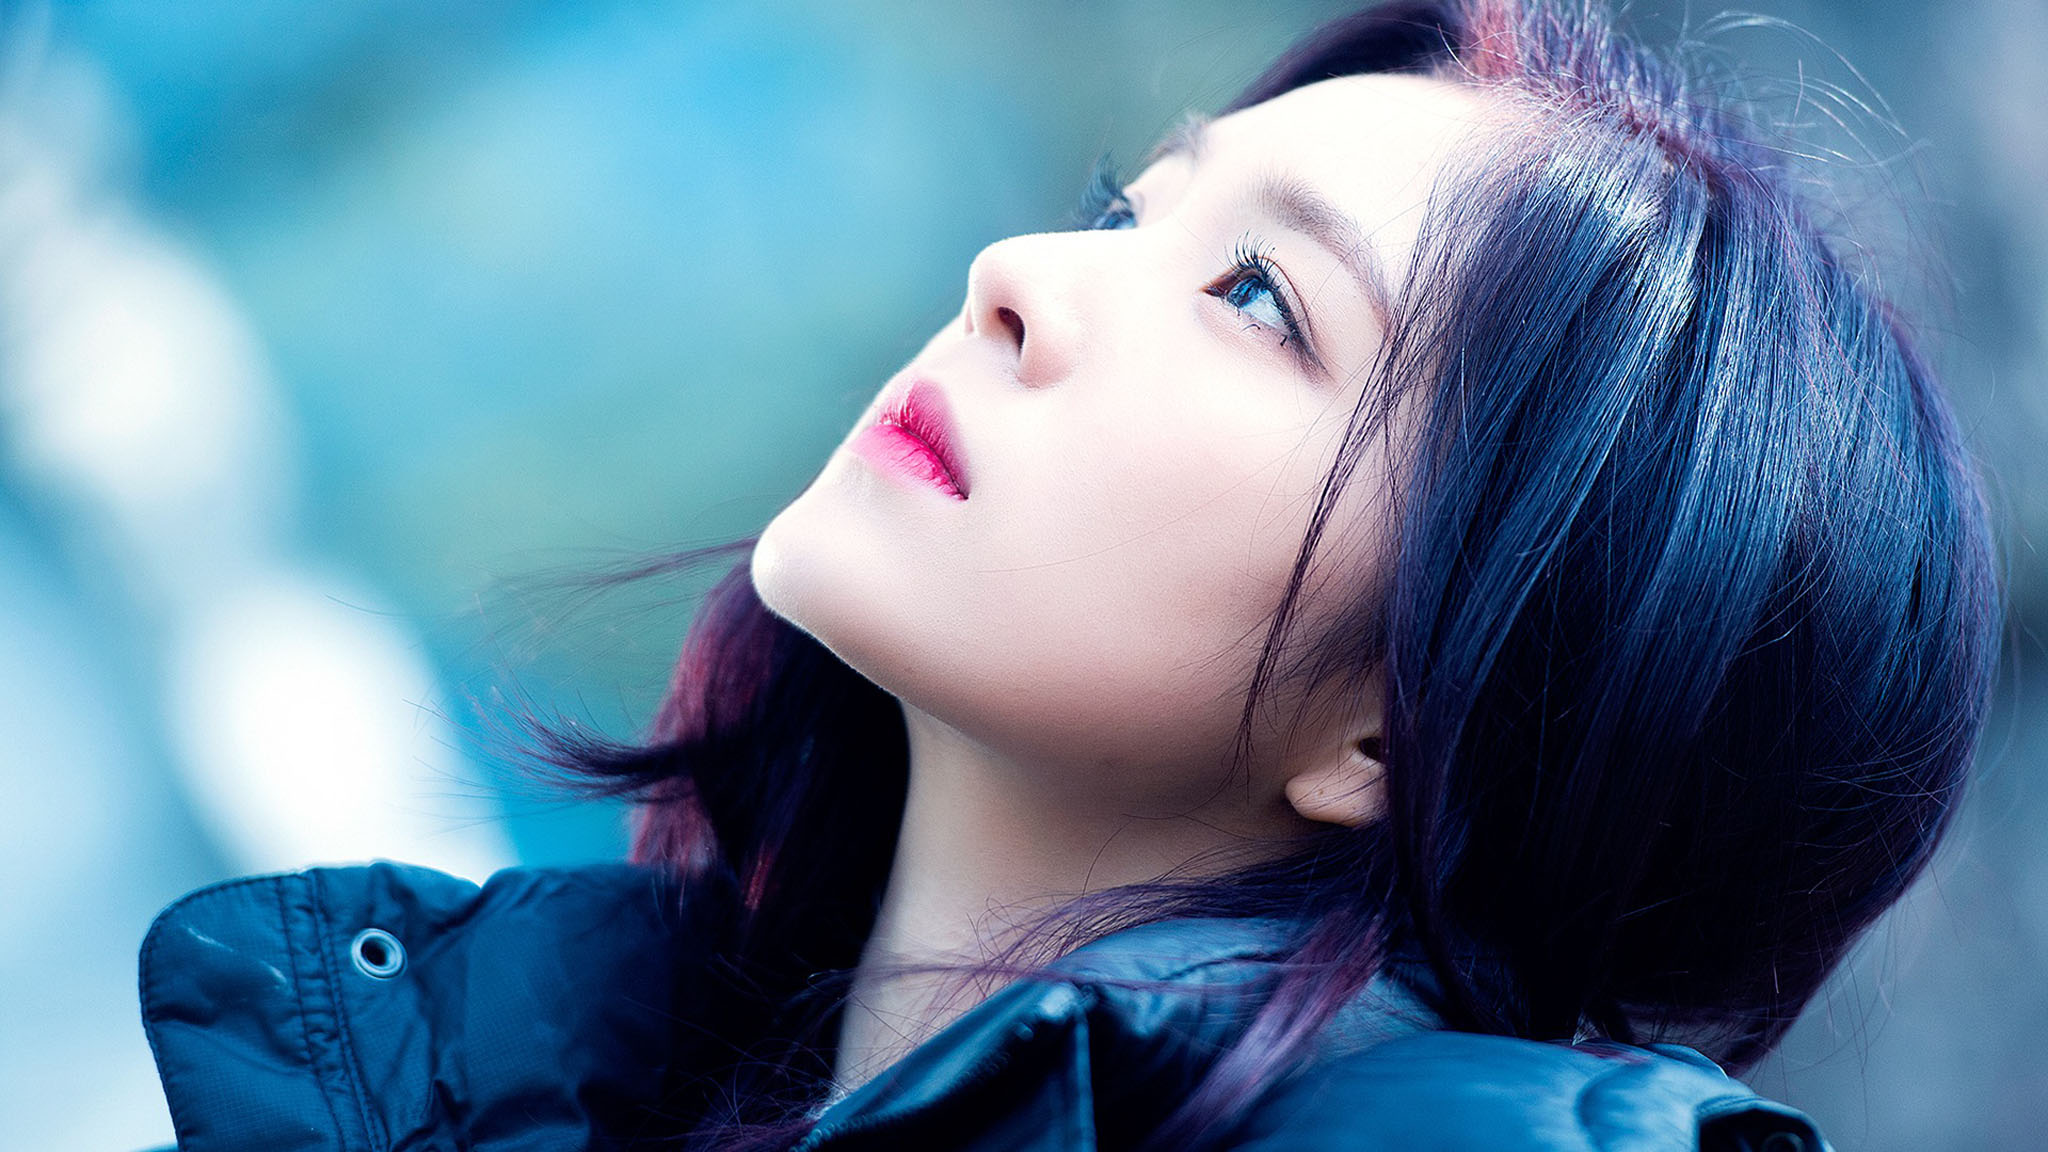 Red Velvet images Irene HD wallpaper and background photos 40873300